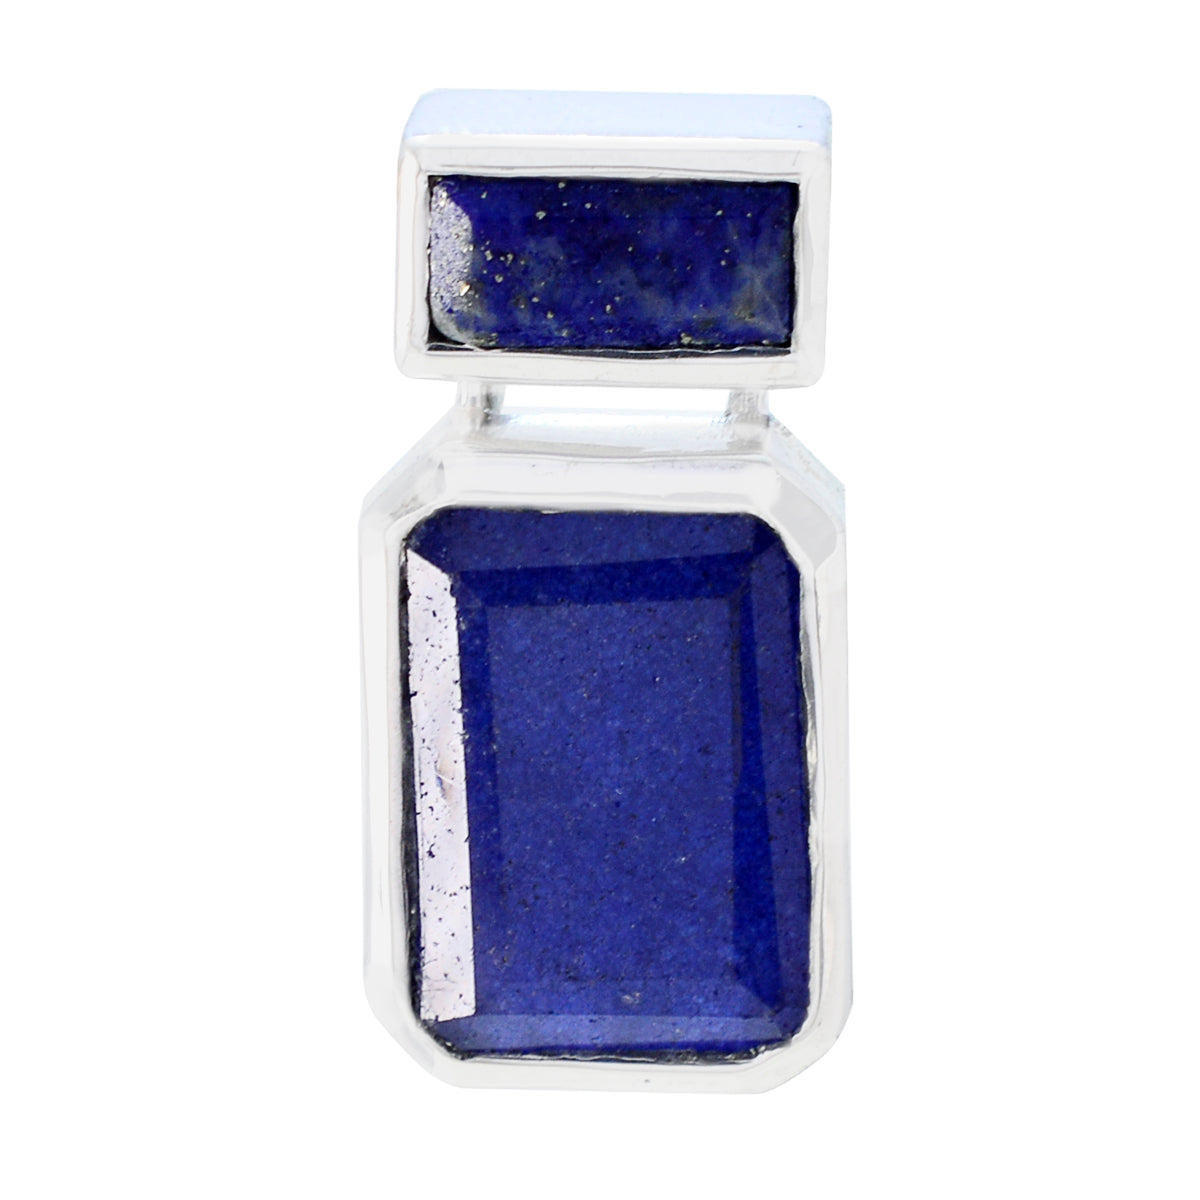 Riyo Good Gemstones Octogon Faceted Nevy Blue Lapis Lazuli Sterling Silver Pendant gift for mothers day